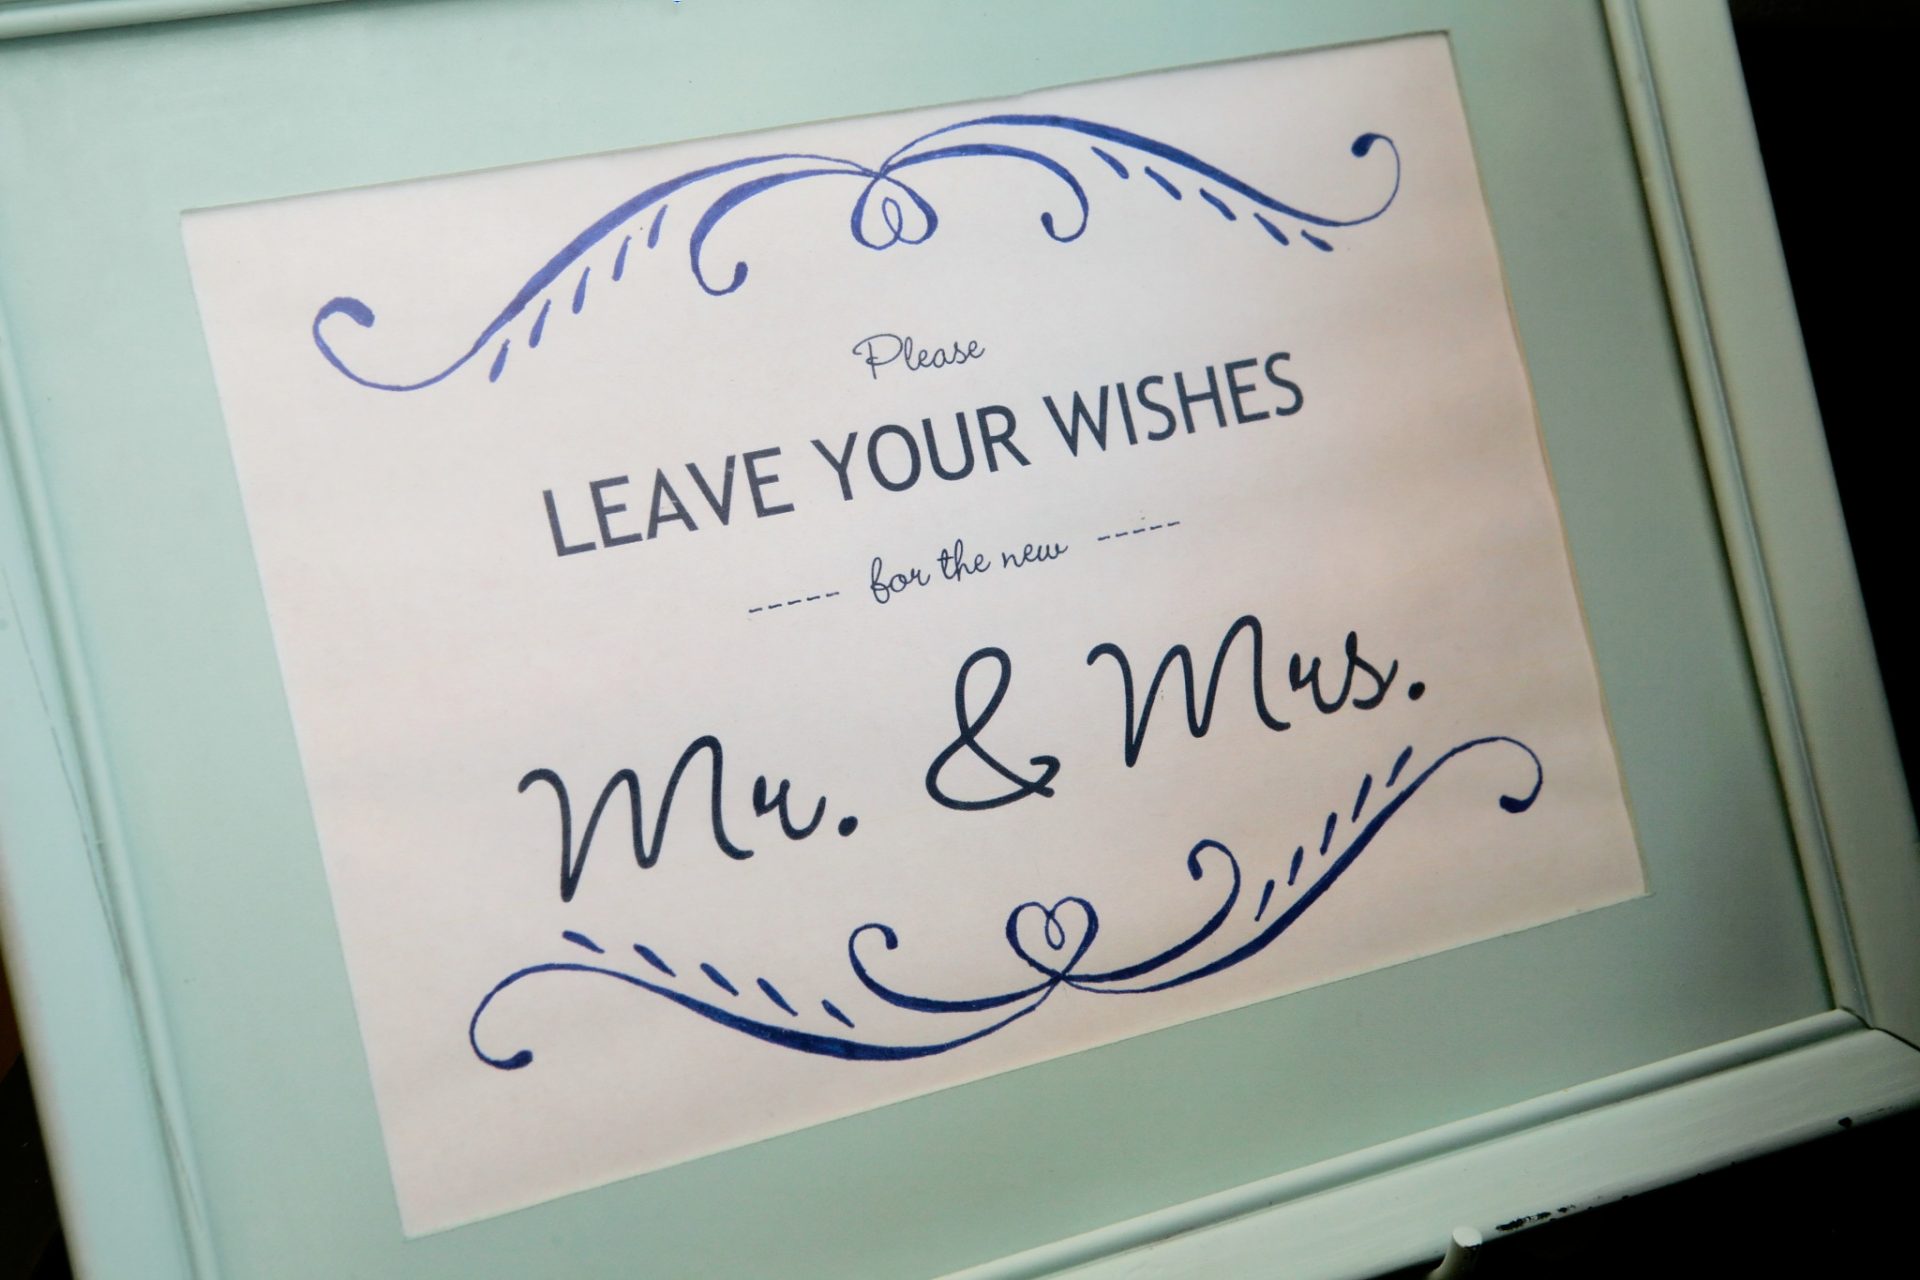 Sign for guests to leave wedding messages for the bride and groom